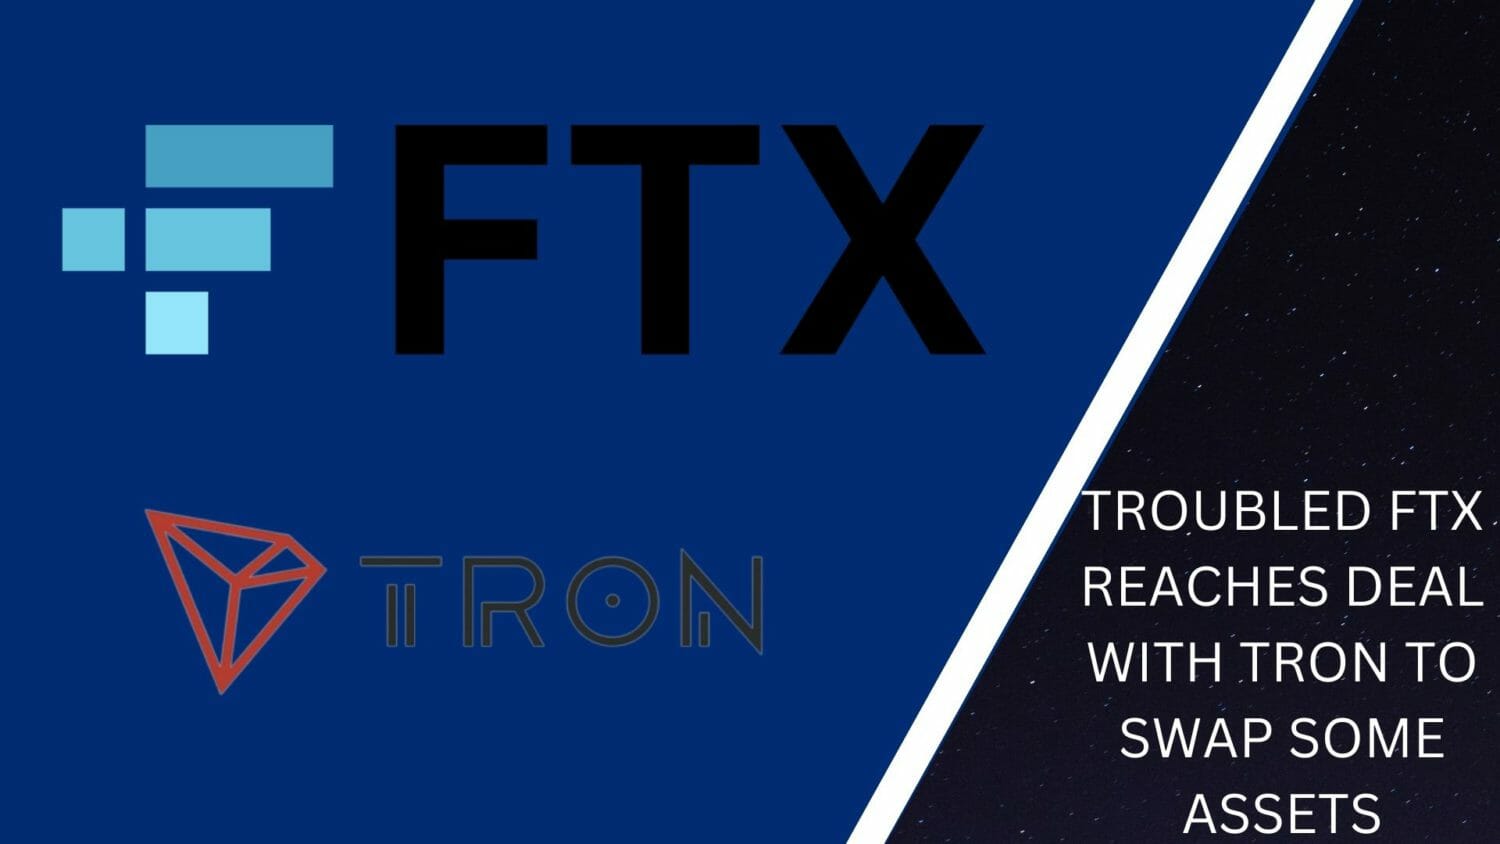 Troubled Ftx Reaches Deal With Tron To Swap Some Assets